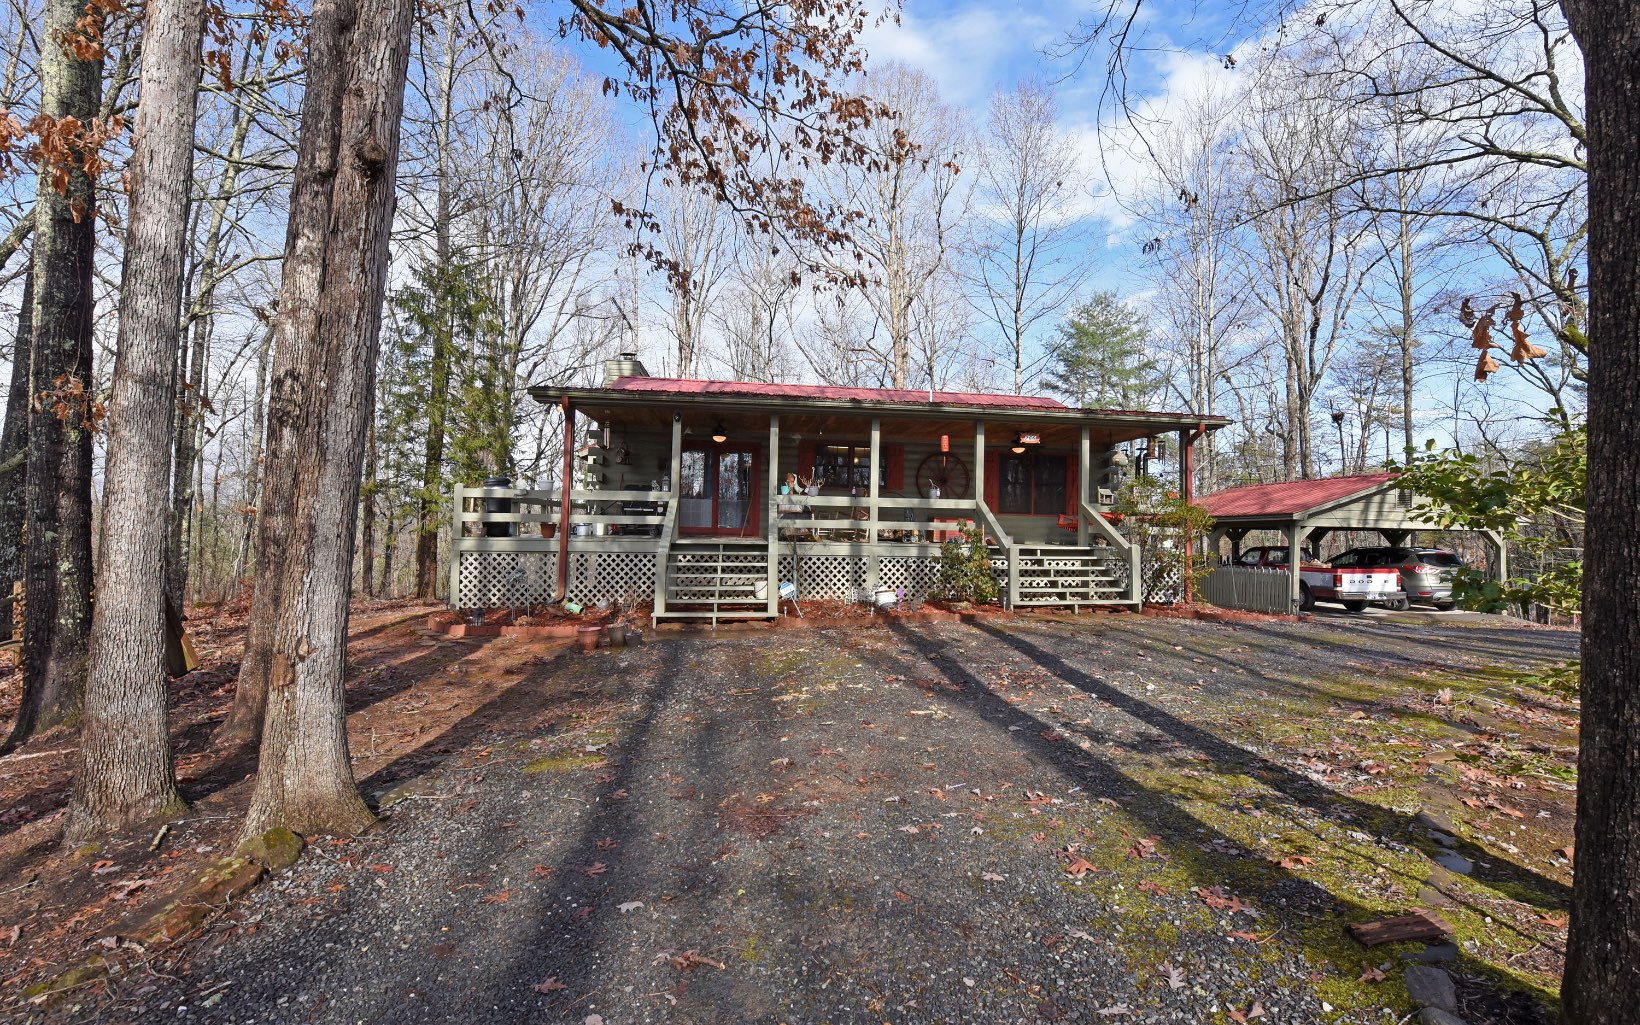 A nice little ranch located in a private neighborhood just minutes from downtown and the Blue Ridge Marina. Give this one a little TLC and make it yours! Great starter home!